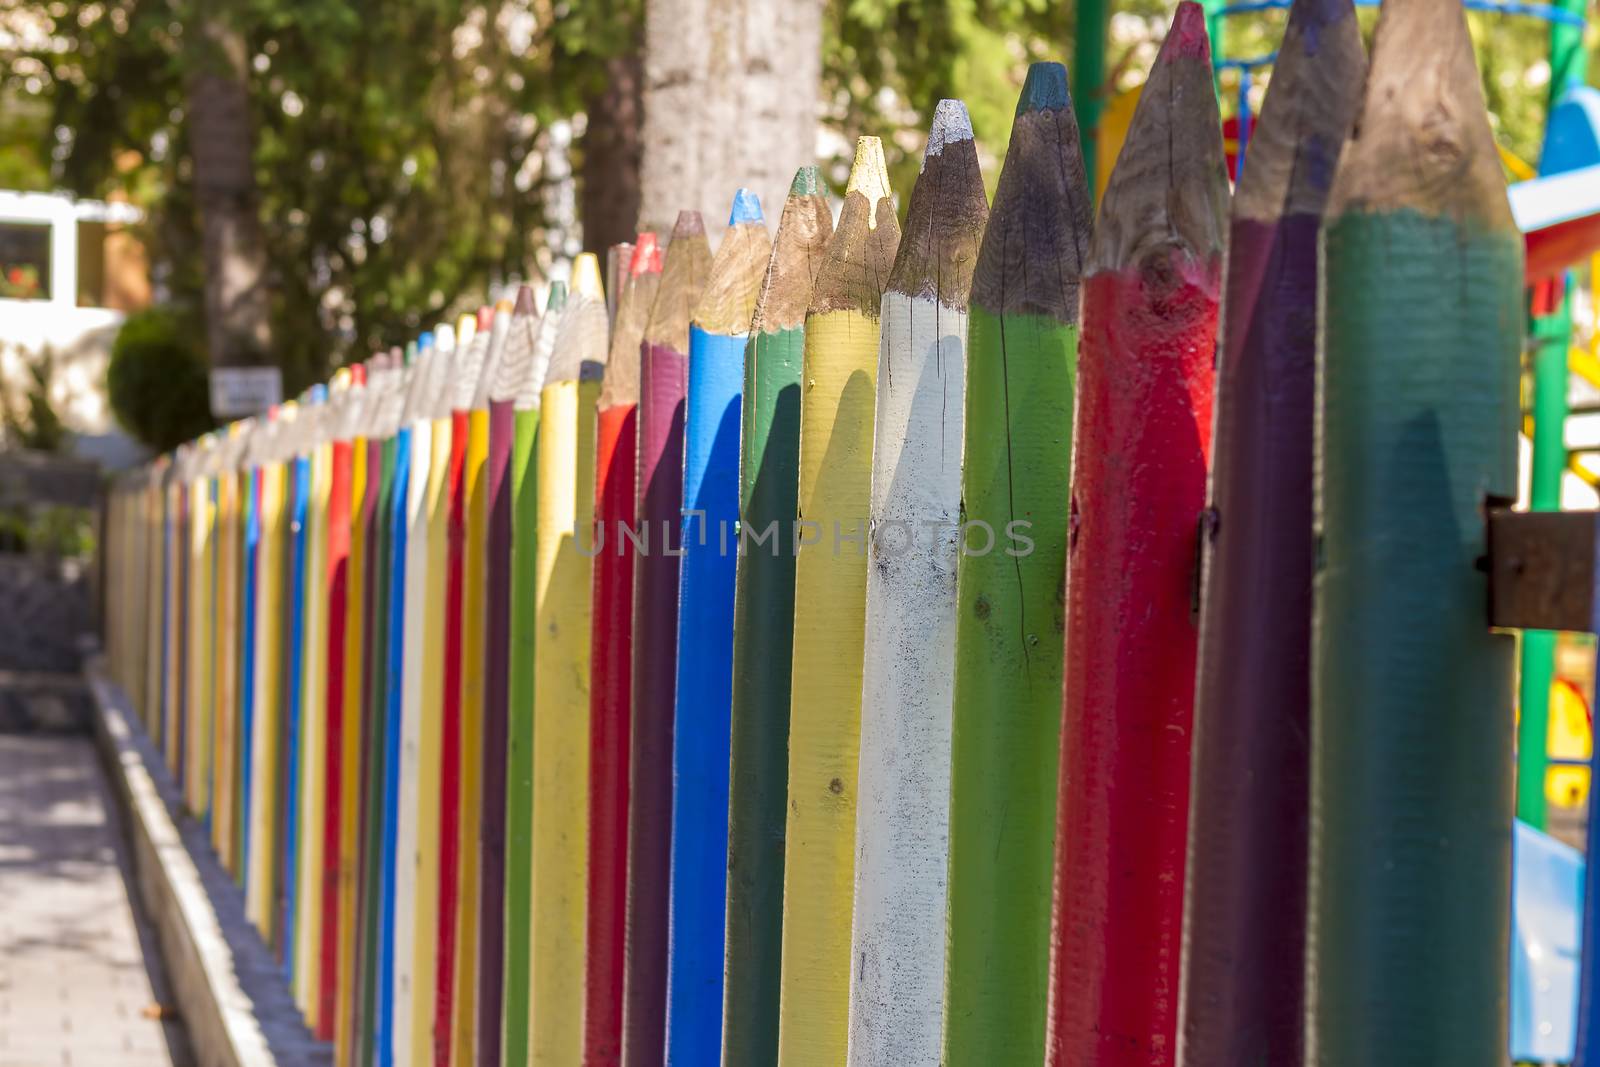 Fence of colourful pencils outside a preschool. Nice depth of field.